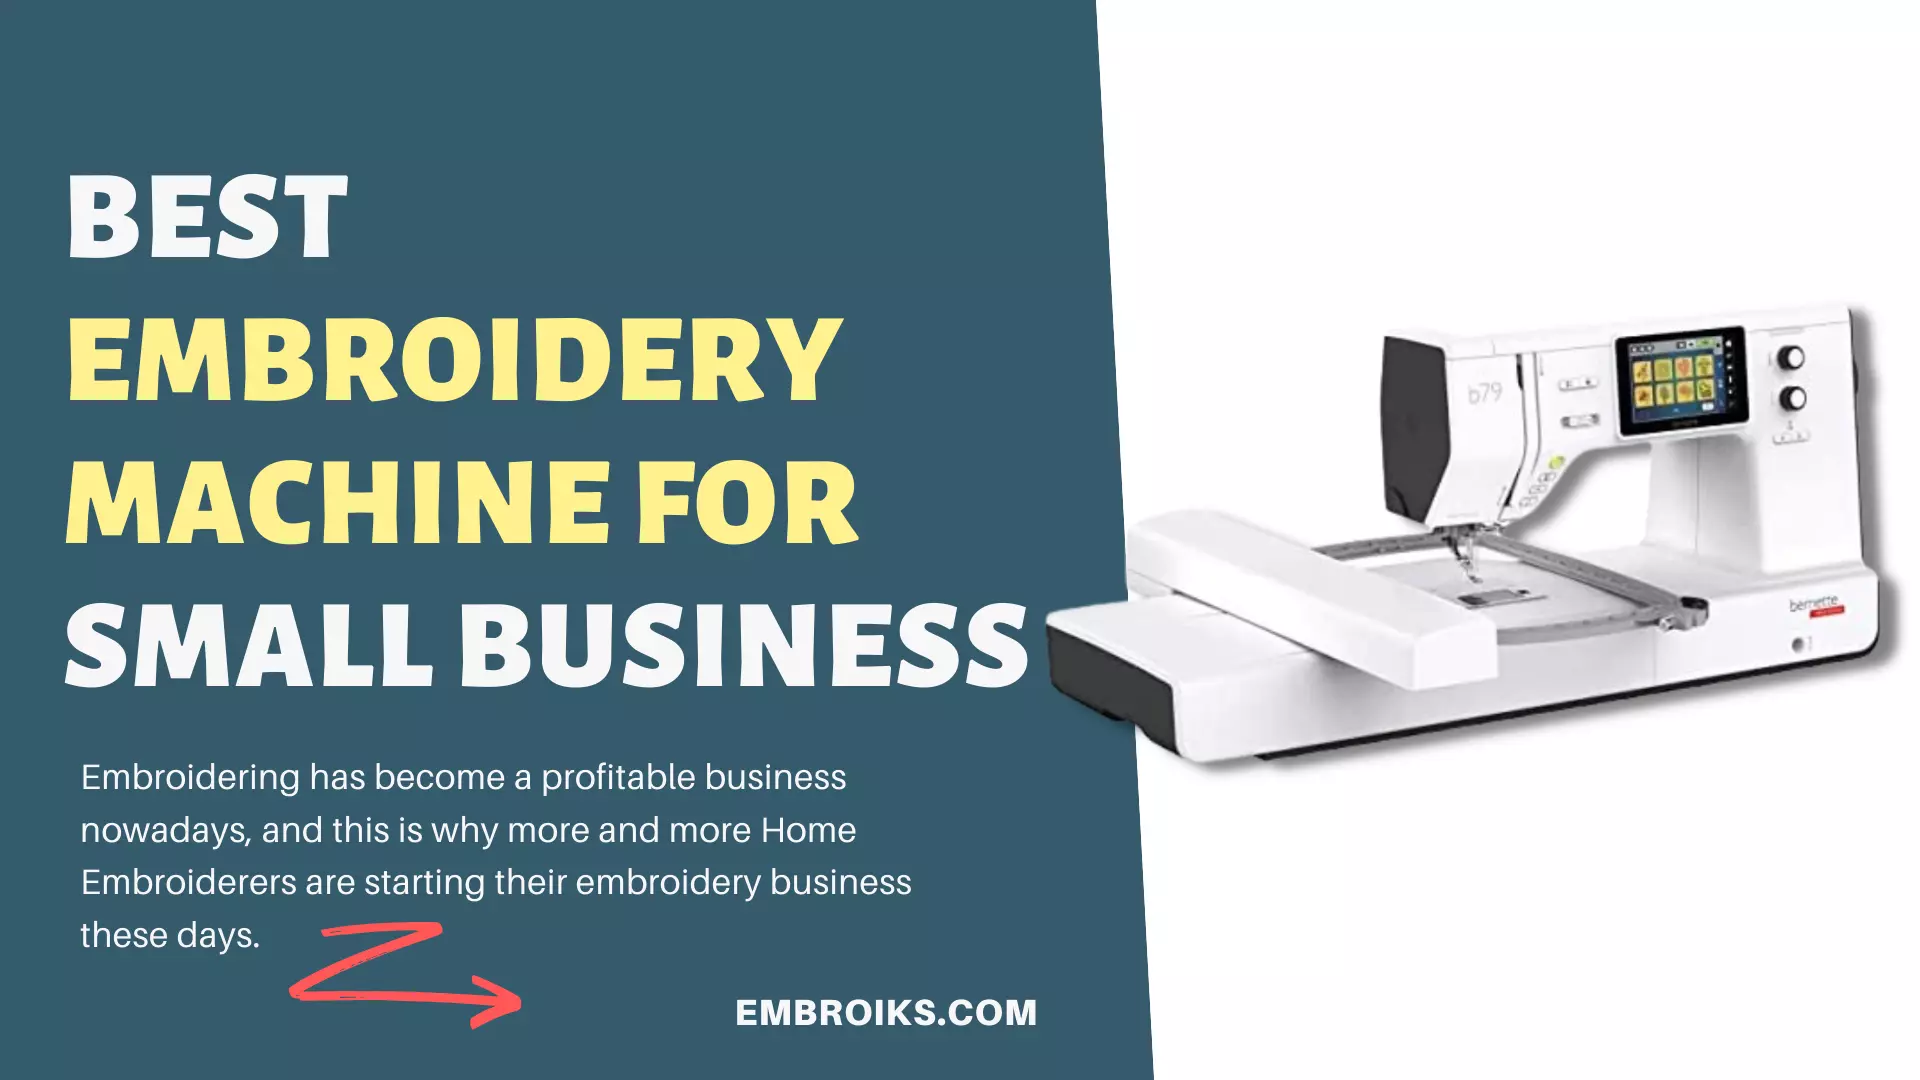 Best Embroidery Machine for Small Business1